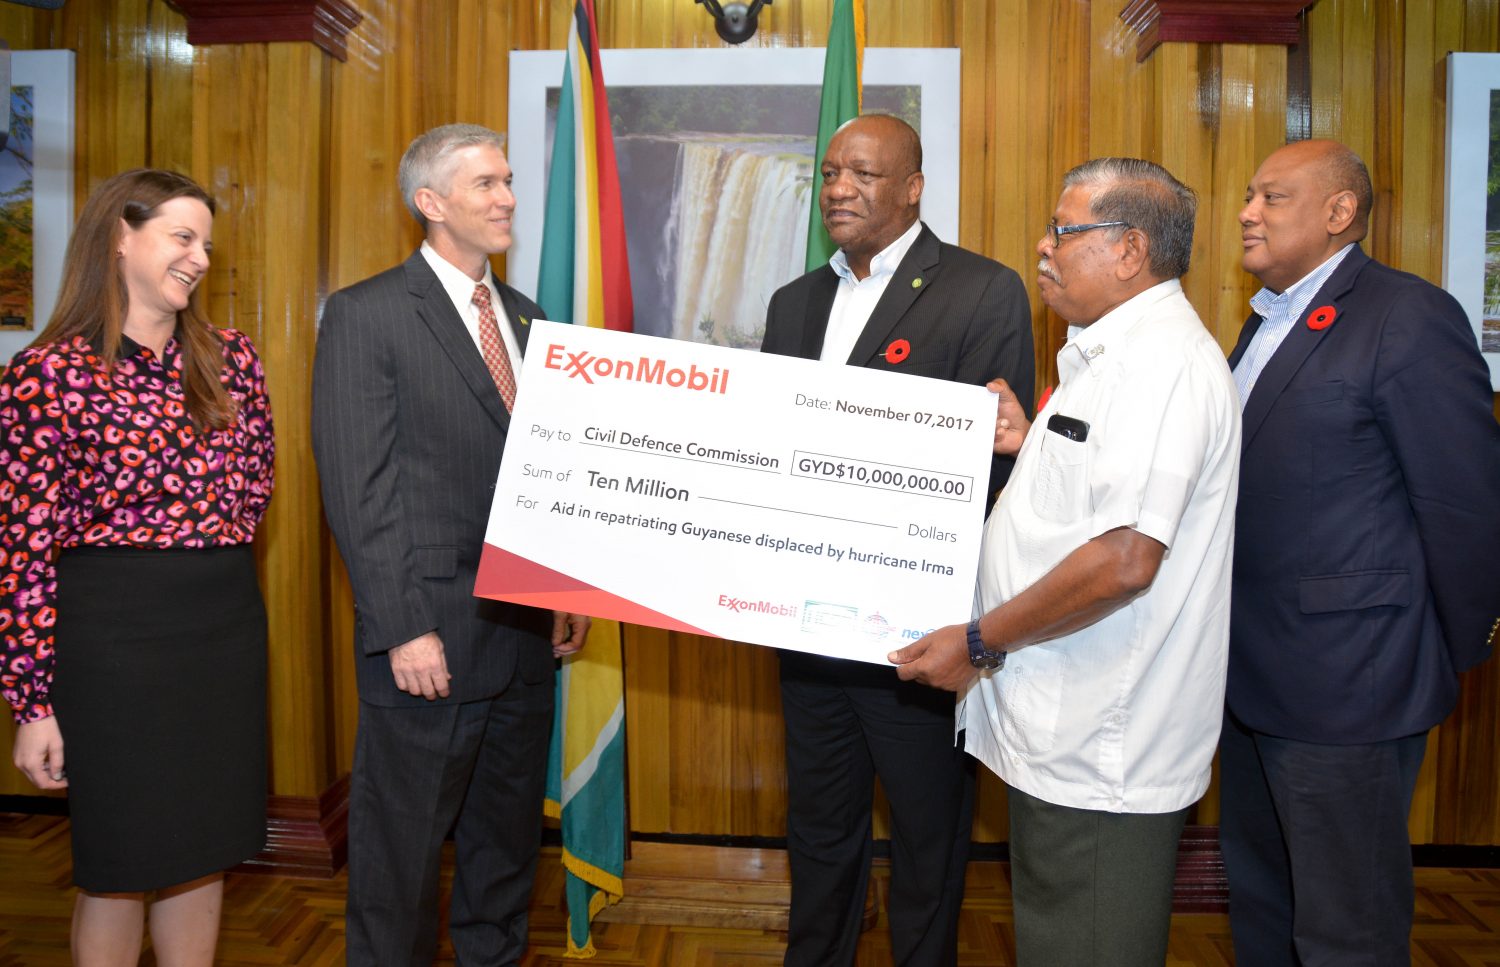 Rod Henson (second from left), ExxonMobil Guyana’s Country Manager after handing over the cheque to Minister of State, Joseph Harmon (centre) and Director General of the Civil Defence Commission, Colonel Chabilall Ramsarup (second from right) as Minister of Natural Resources,  Raphael Trotman (right).  (Ministry of the Presidency photo)

